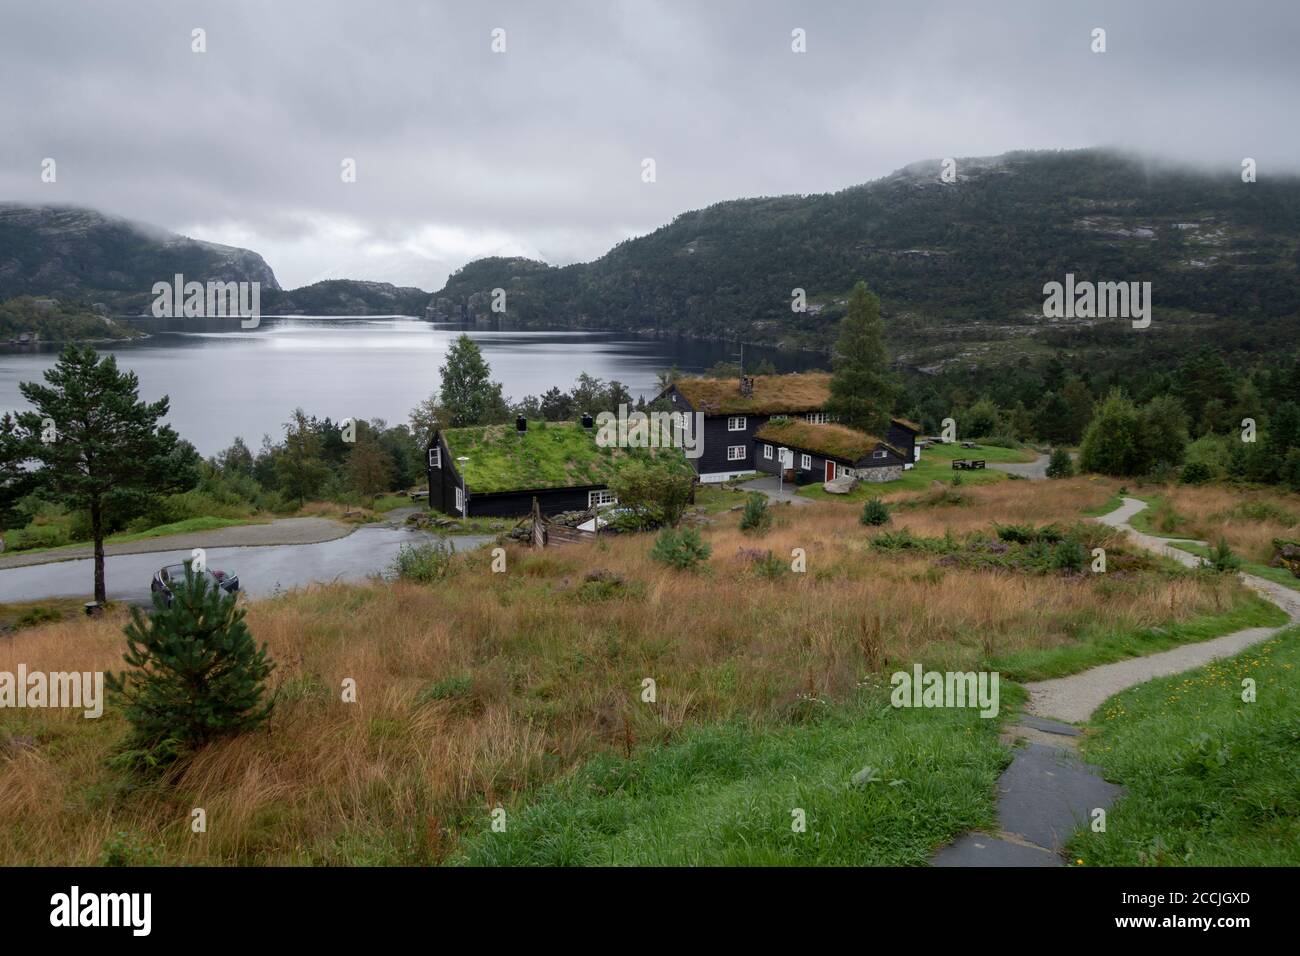 Traditional norwegian wooden houses with grass on the roof. Typical Norway architecture Stock Photo